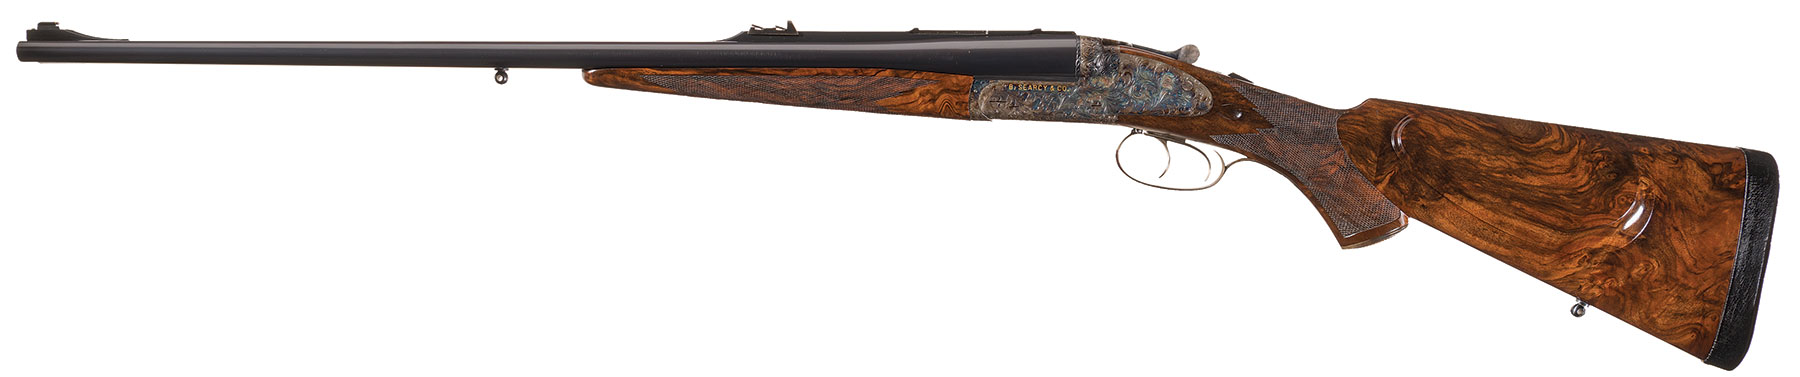 B. Searcy Deluxe Grade Double Rifle